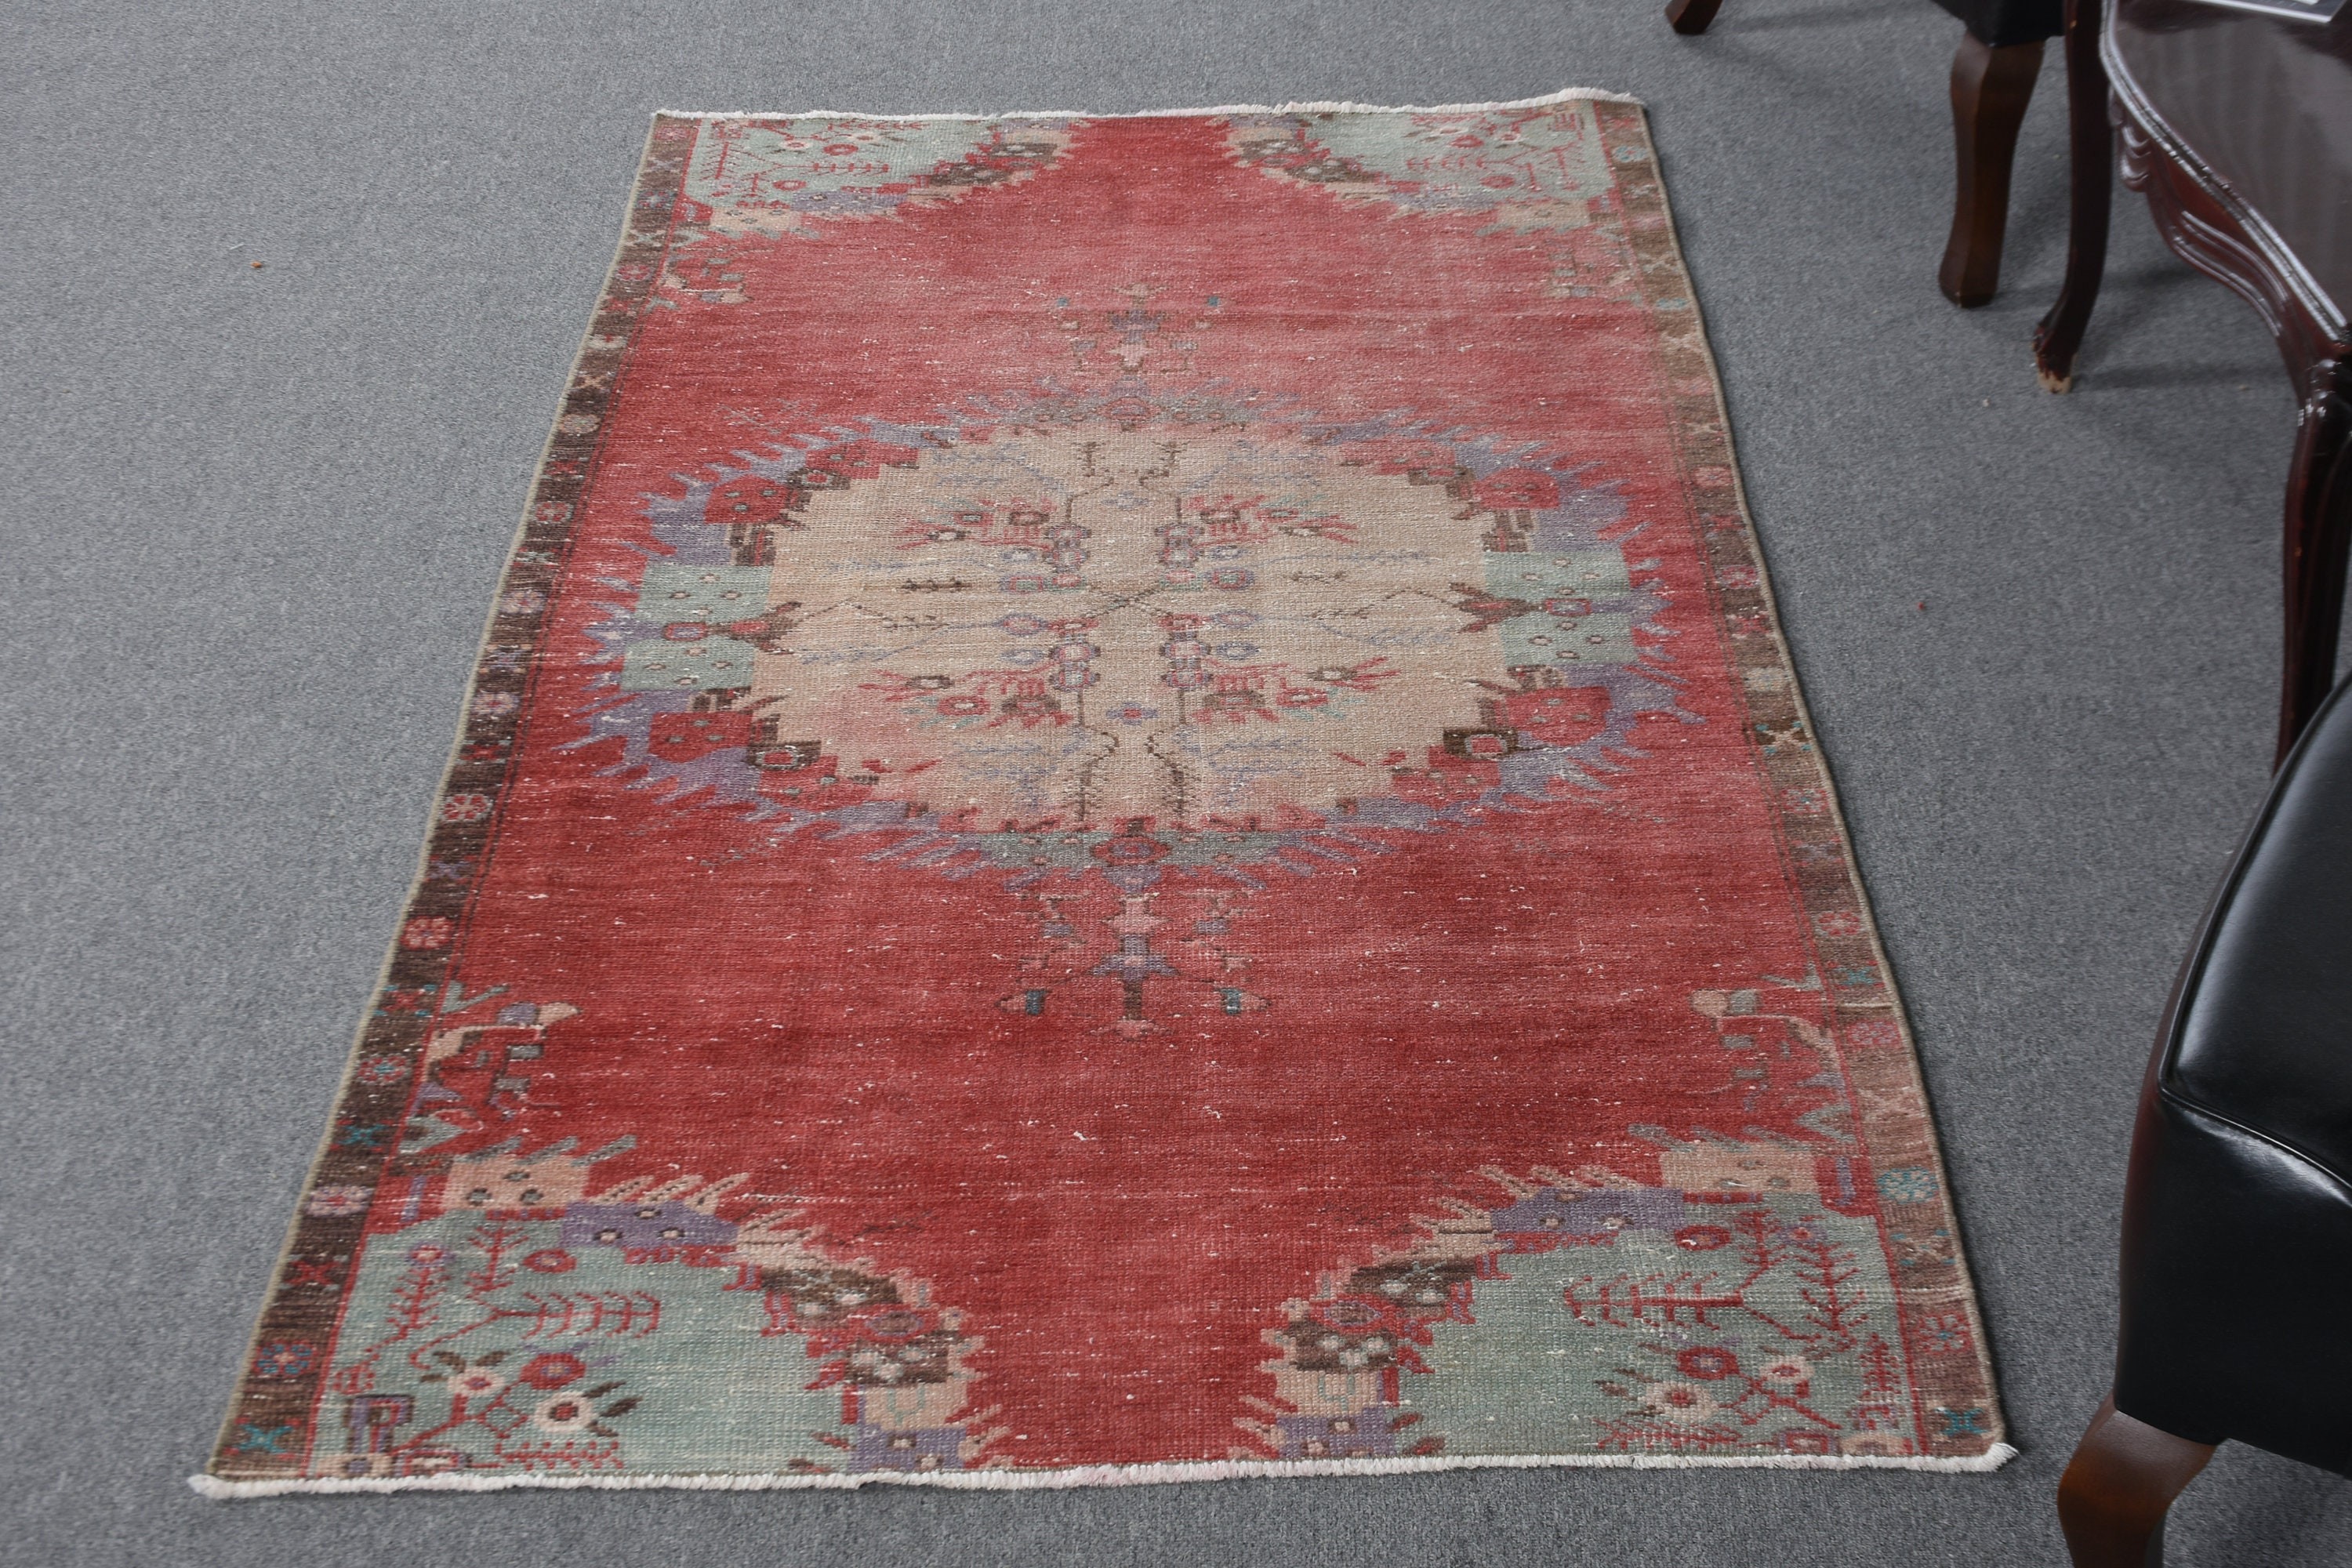 Home Decor Rug, 3.3x6.6 ft Accent Rugs, Ethnic Rugs, Vintage Rug, Red Home Decor Rug, Oriental Rugs, Nursery Rugs, Entry Rug, Turkish Rug